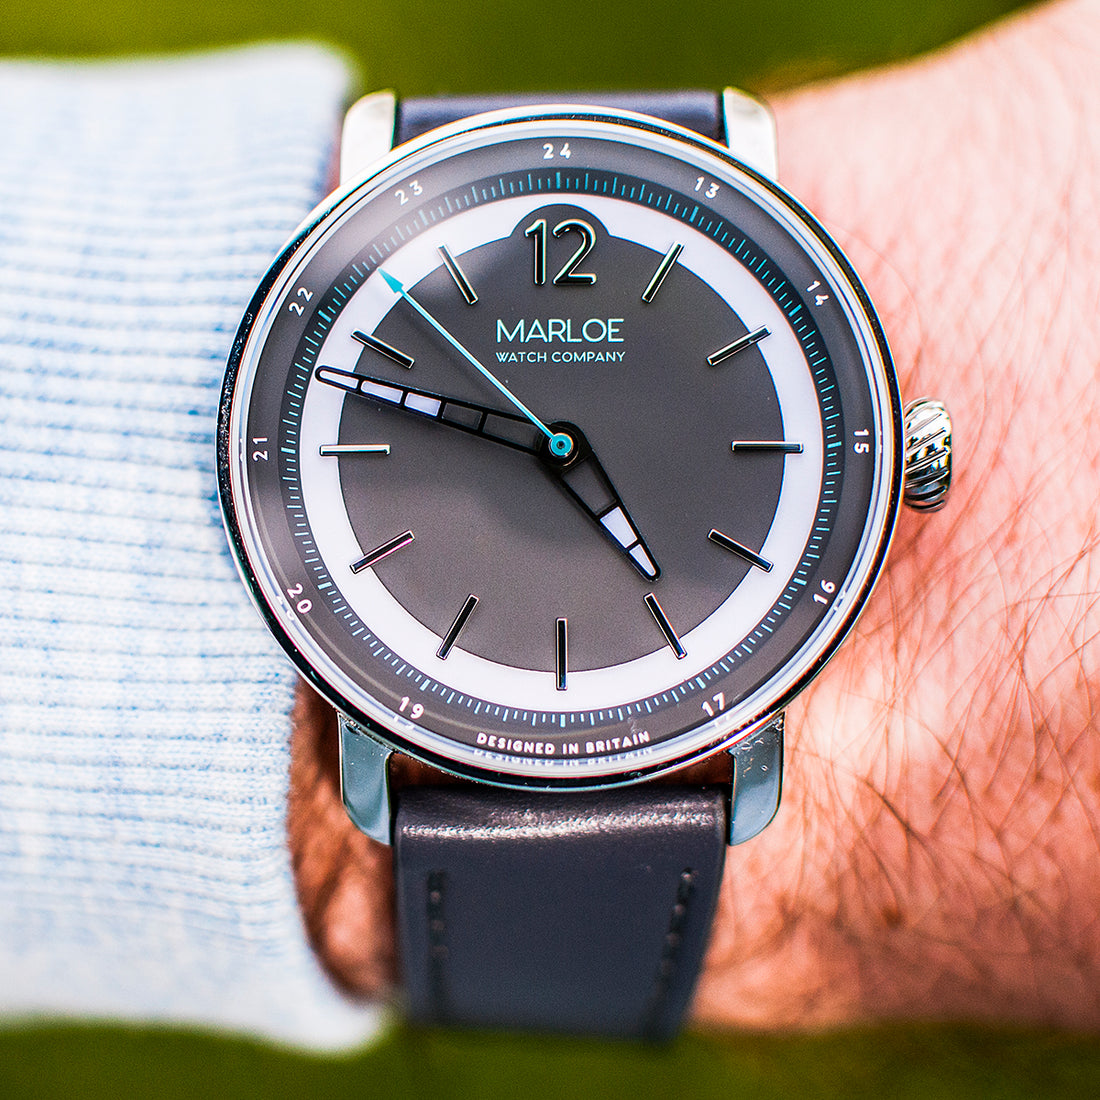 Marloe Coniston Vulcan Watch Review - Fantastic Design, Great Value, and a Hidden Surprise